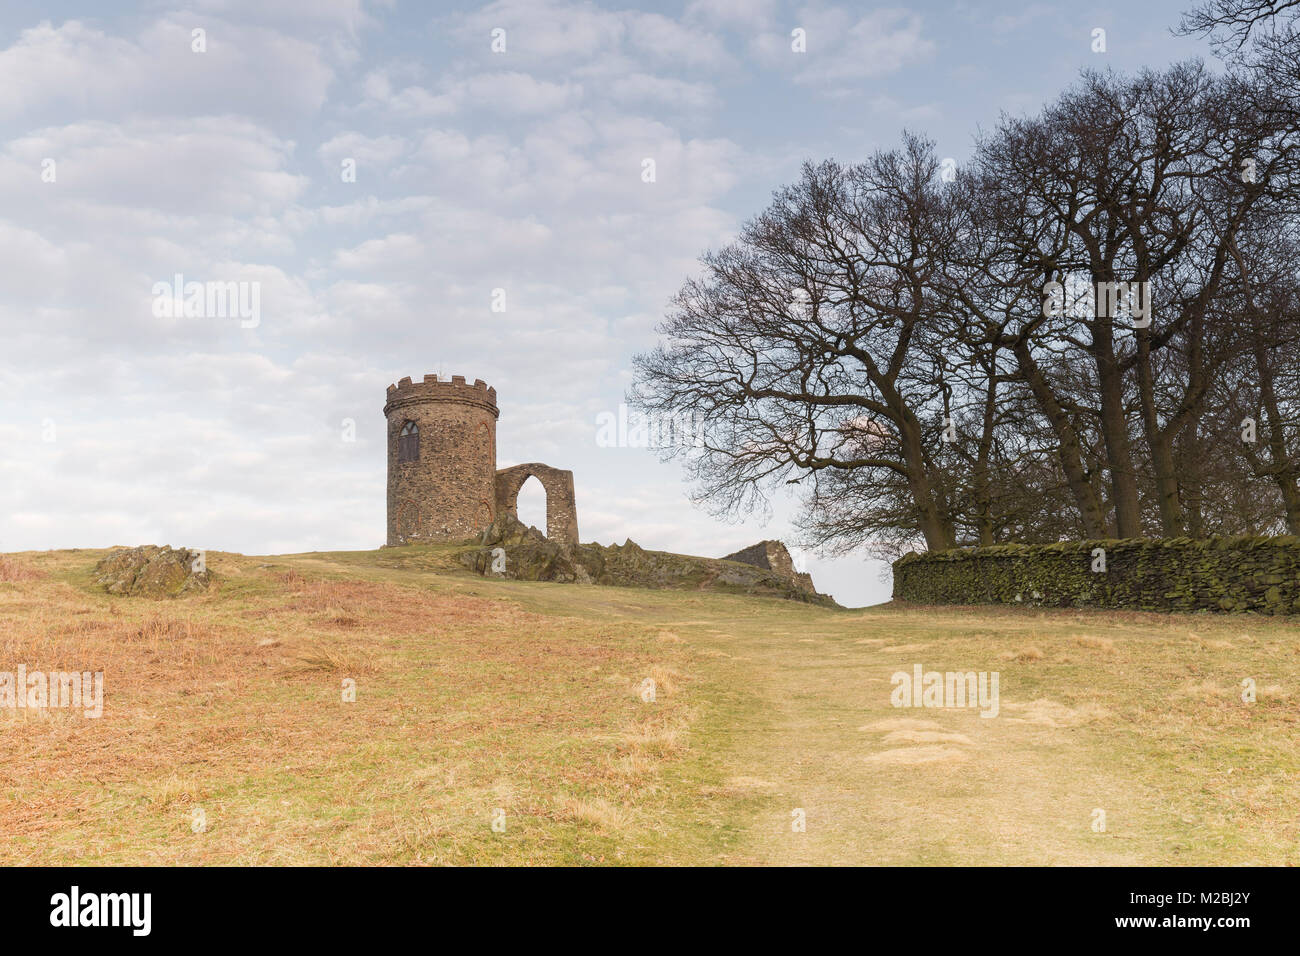 Old John is a folly, this image shows the worn path up to Old John, in Bradgate Park, Leicestershire, England. Stock Photo